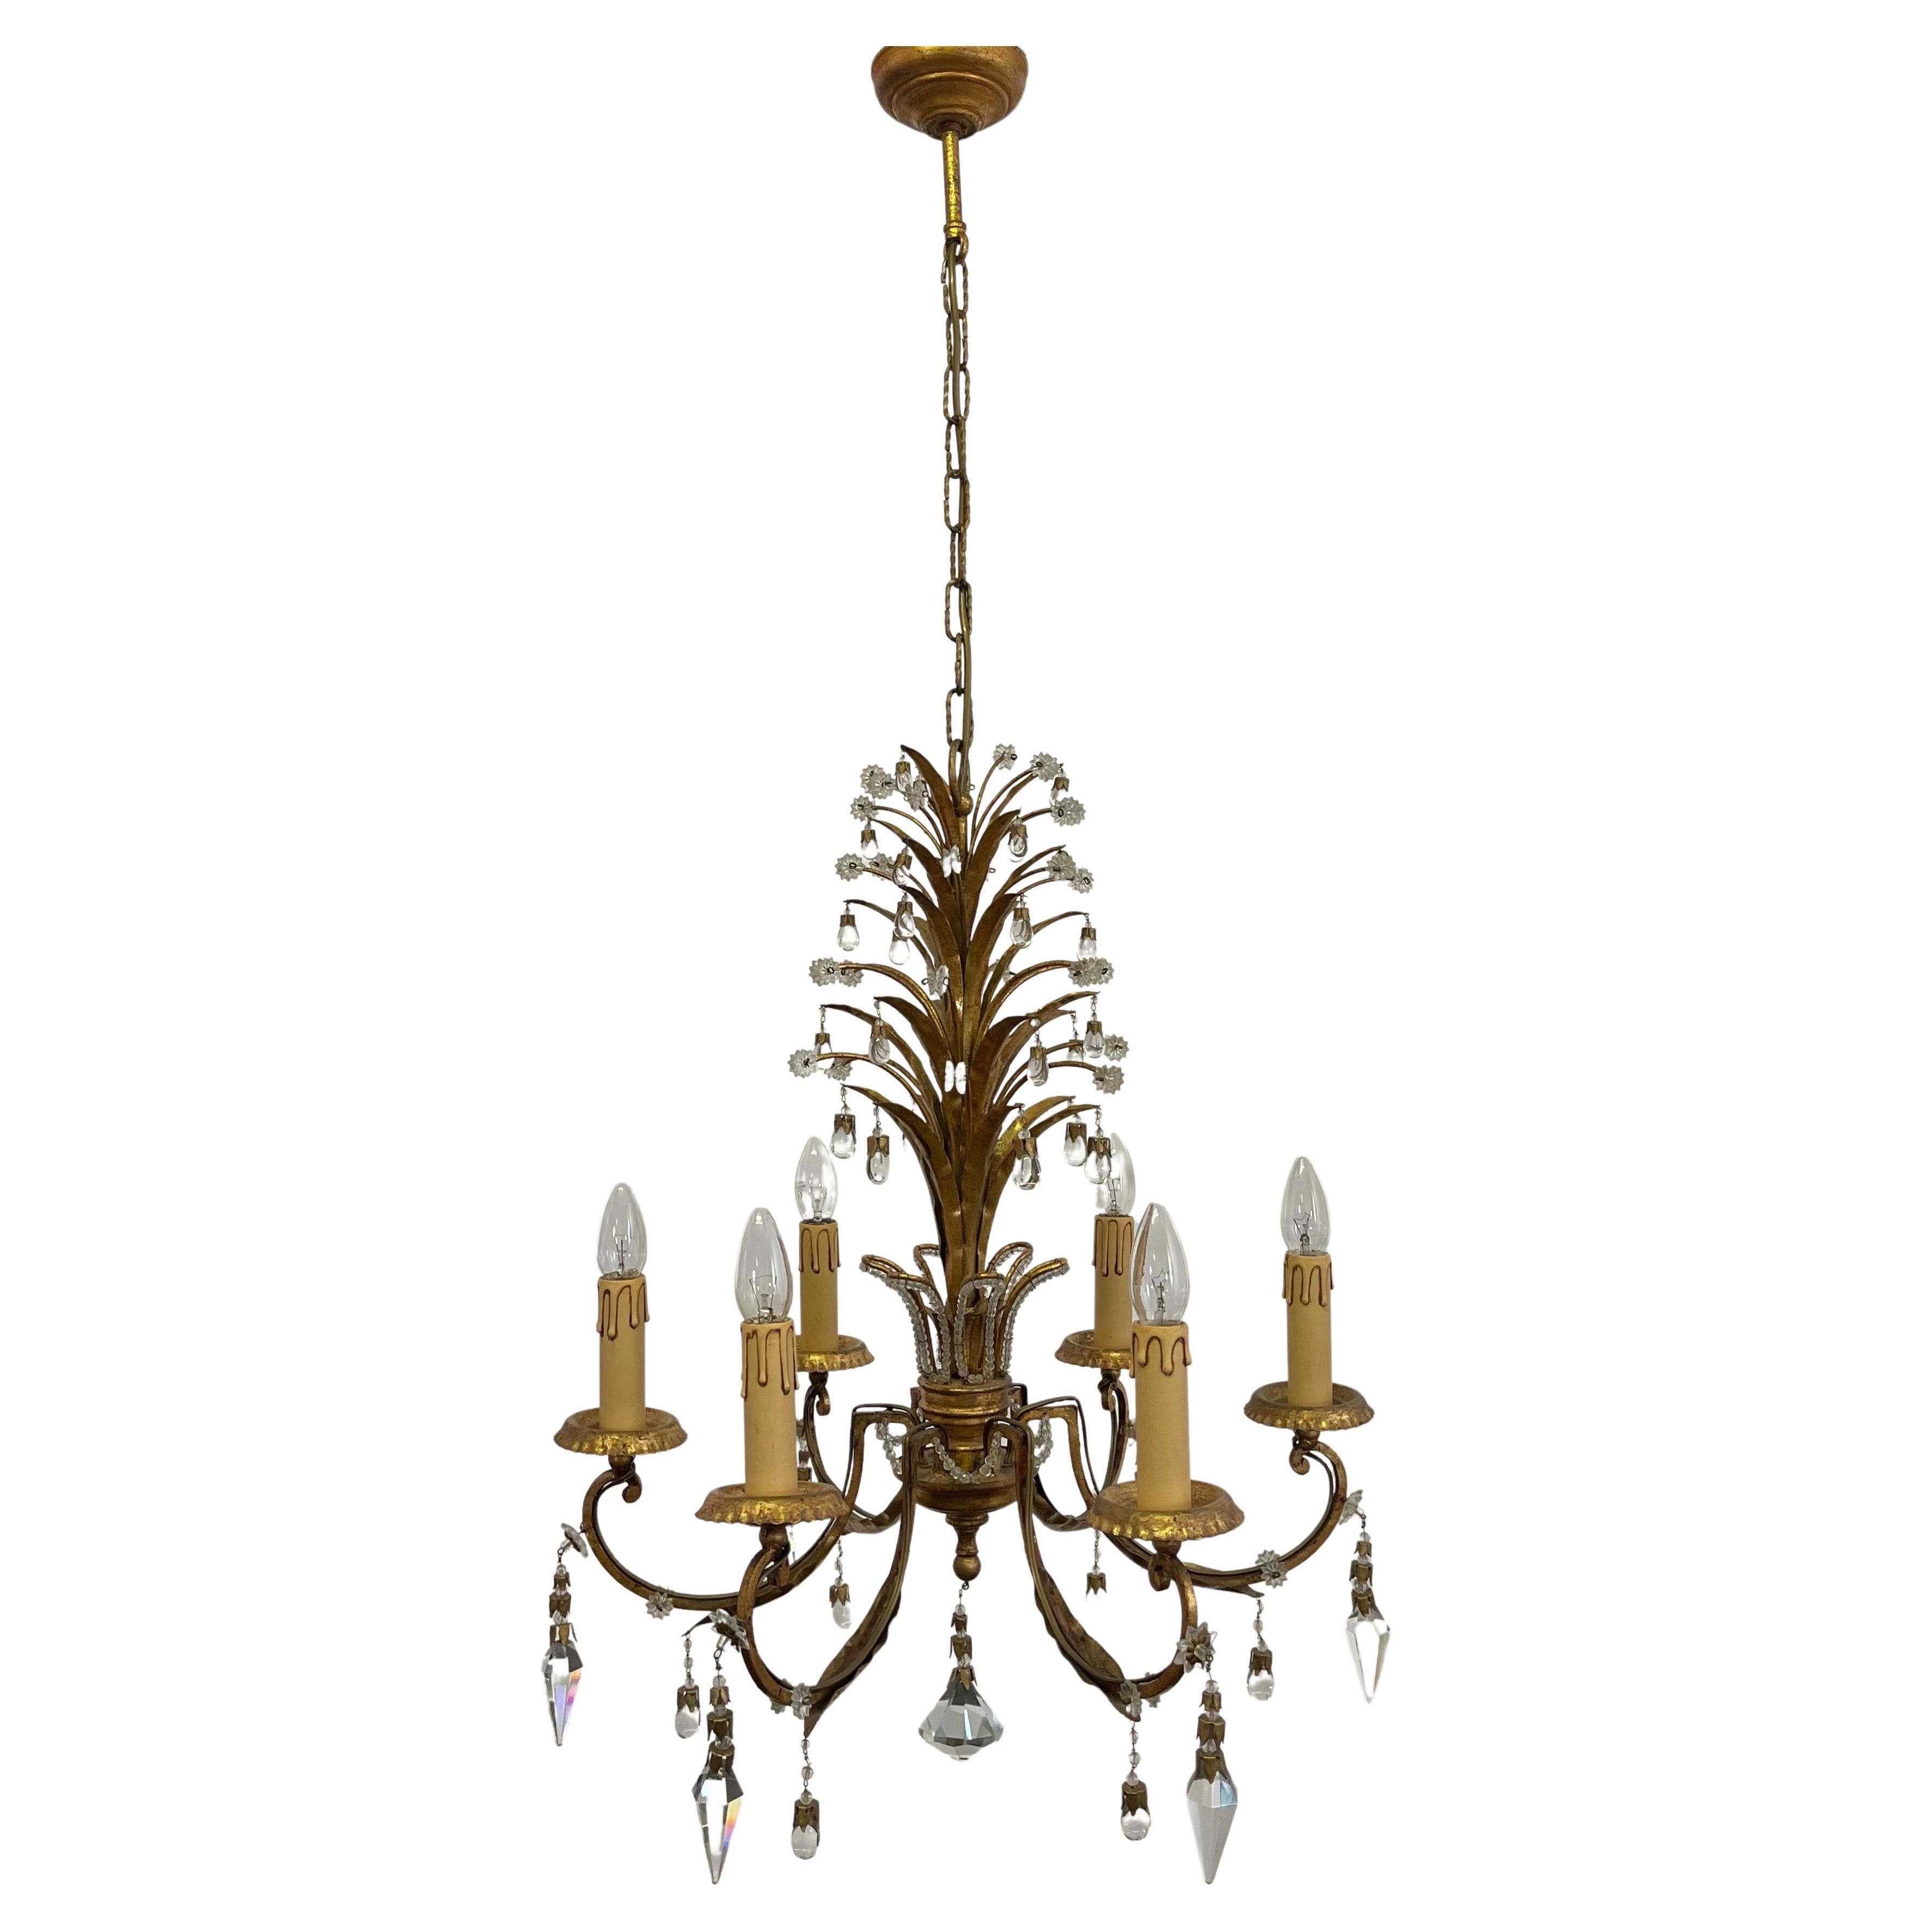 A hollywood regency style chandelier by Giovani Banci, Italy, circa 1970s.
This beautiful handcrafted chandelier is made of patinated and gilt iron, decorated with lead crystals tear drops and prism.
Measurements: totally height 47.24 inches,